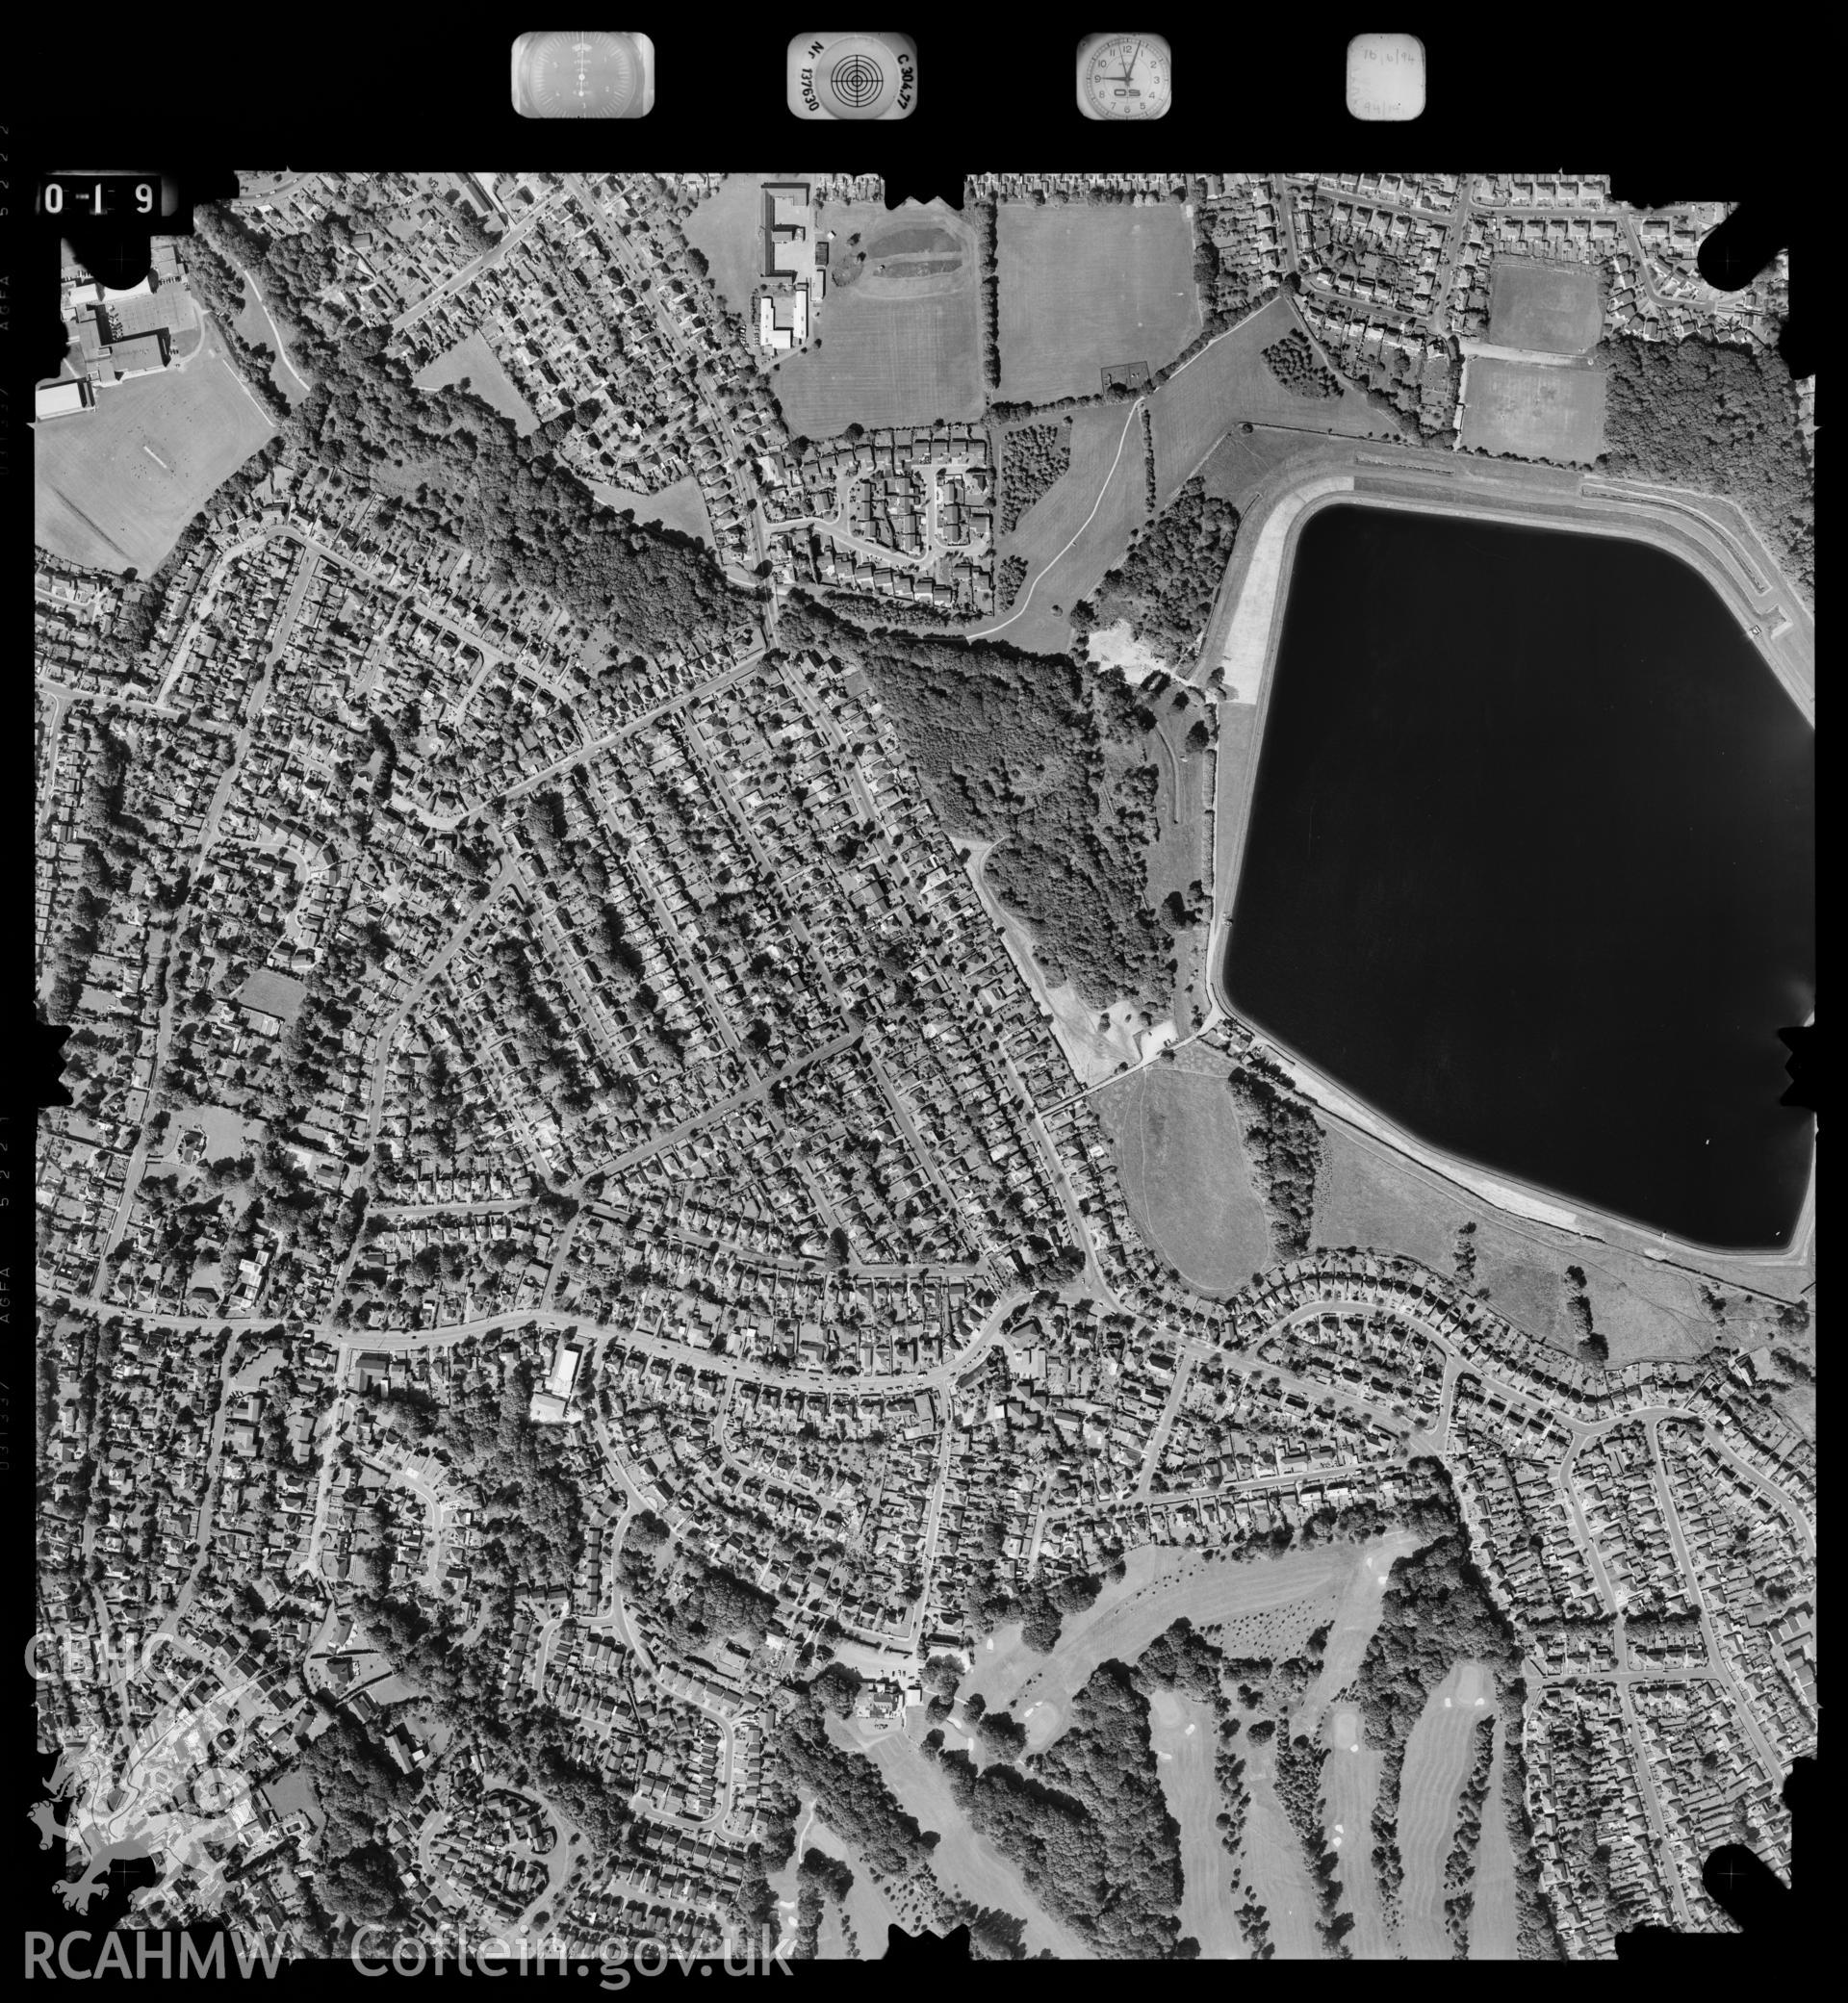 Digitized copy of an aerial photograph showing the Cyncoed area, taken by Ordnance Survey, 1994.